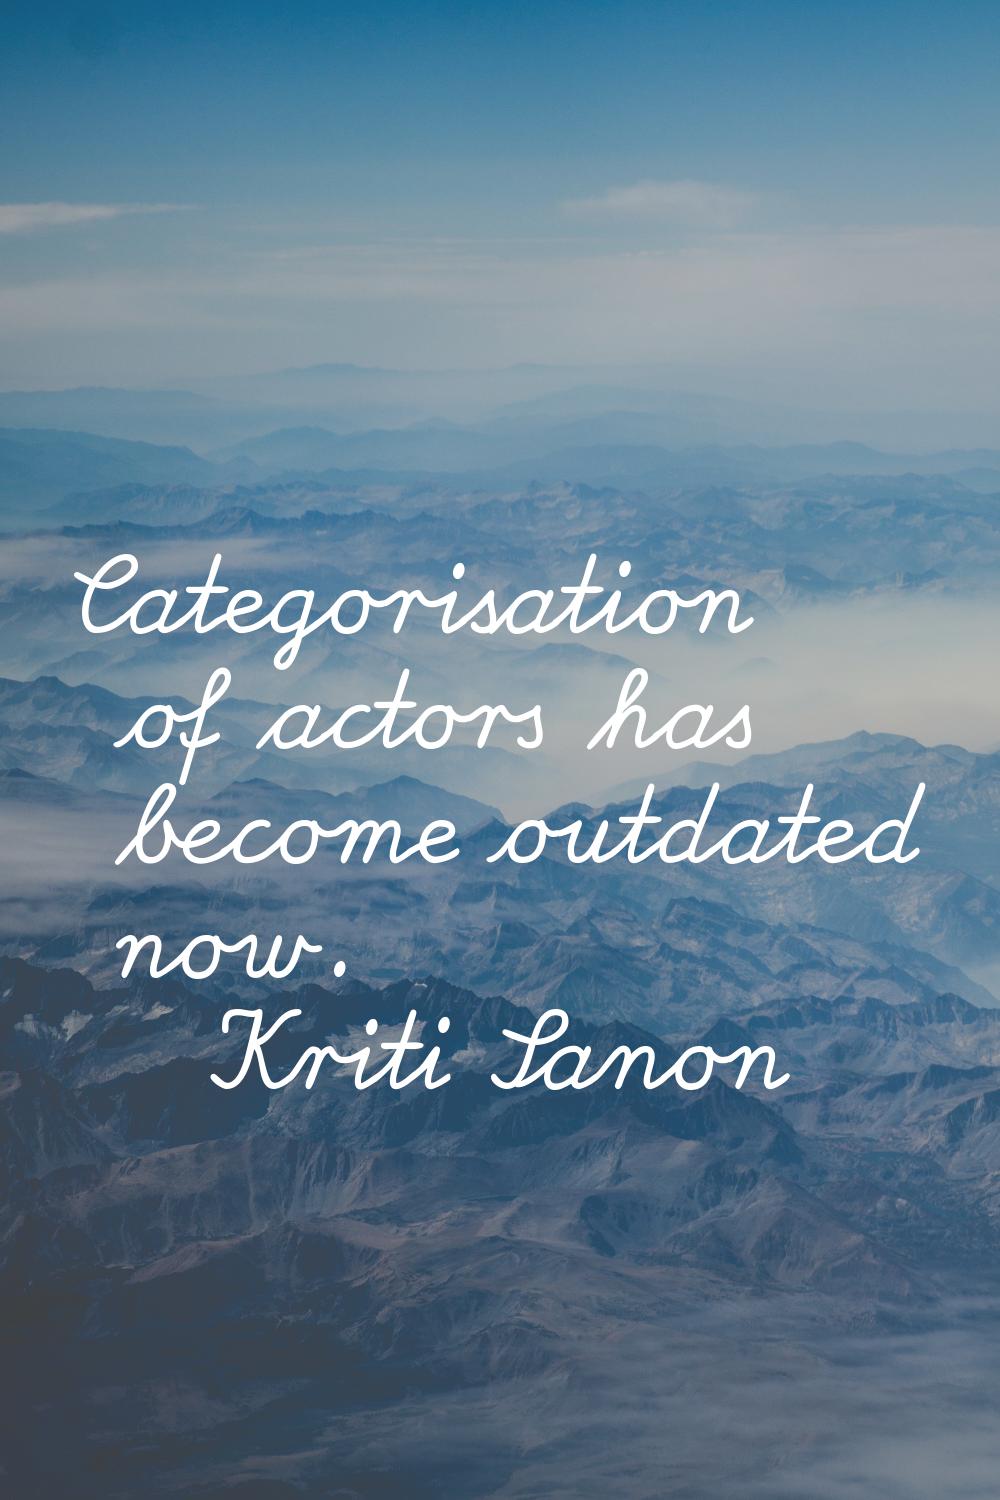 Categorisation of actors has become outdated now.